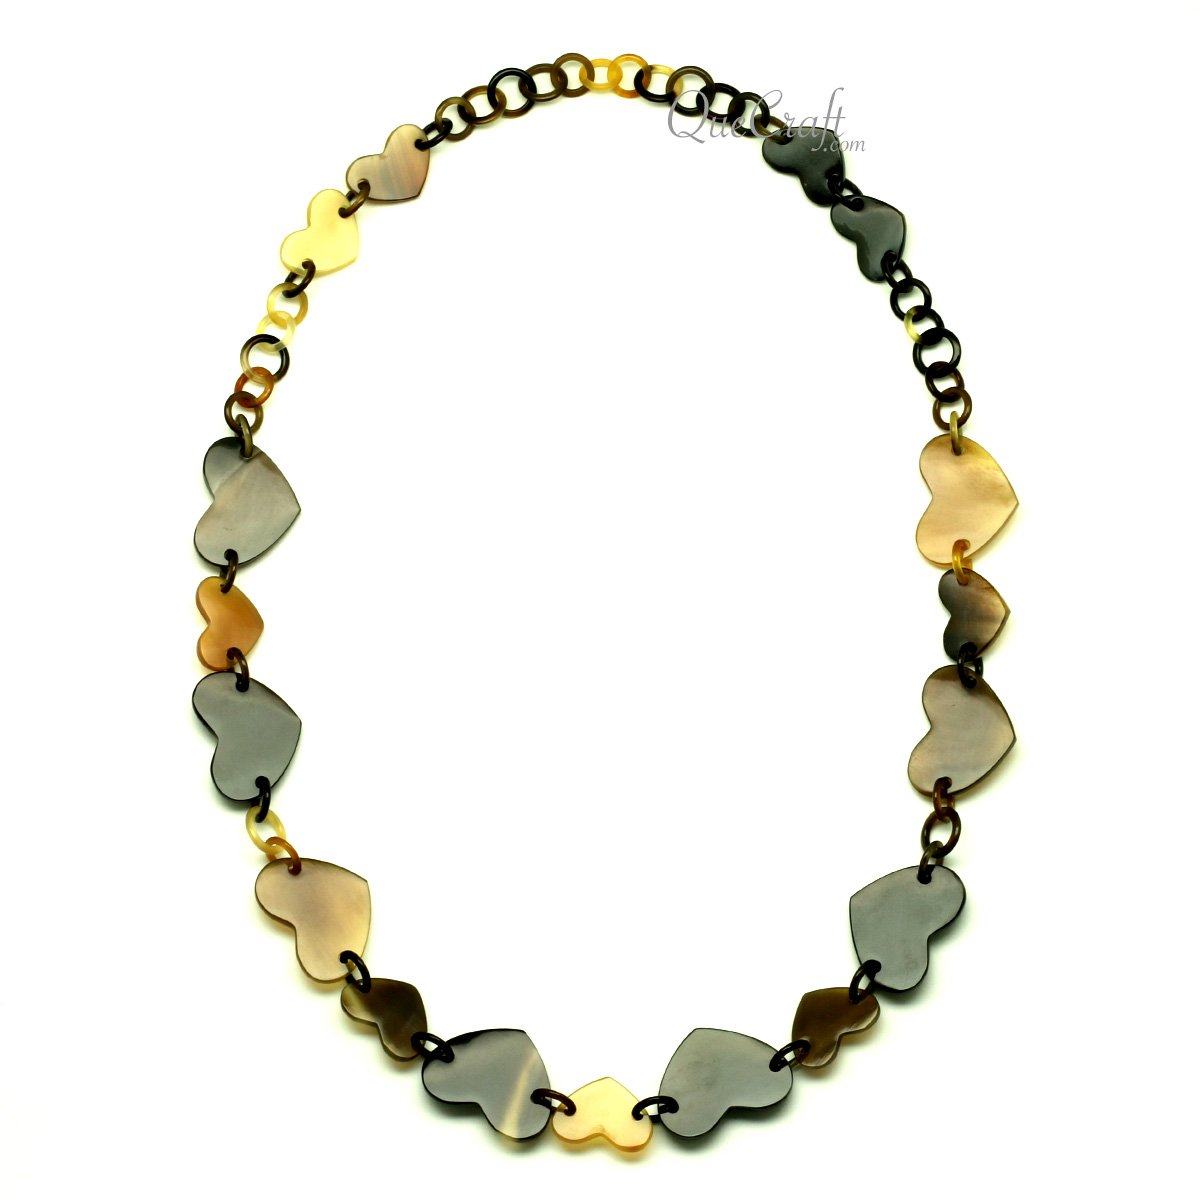 Horn Chain Necklace #13279 - HORN JEWELRY